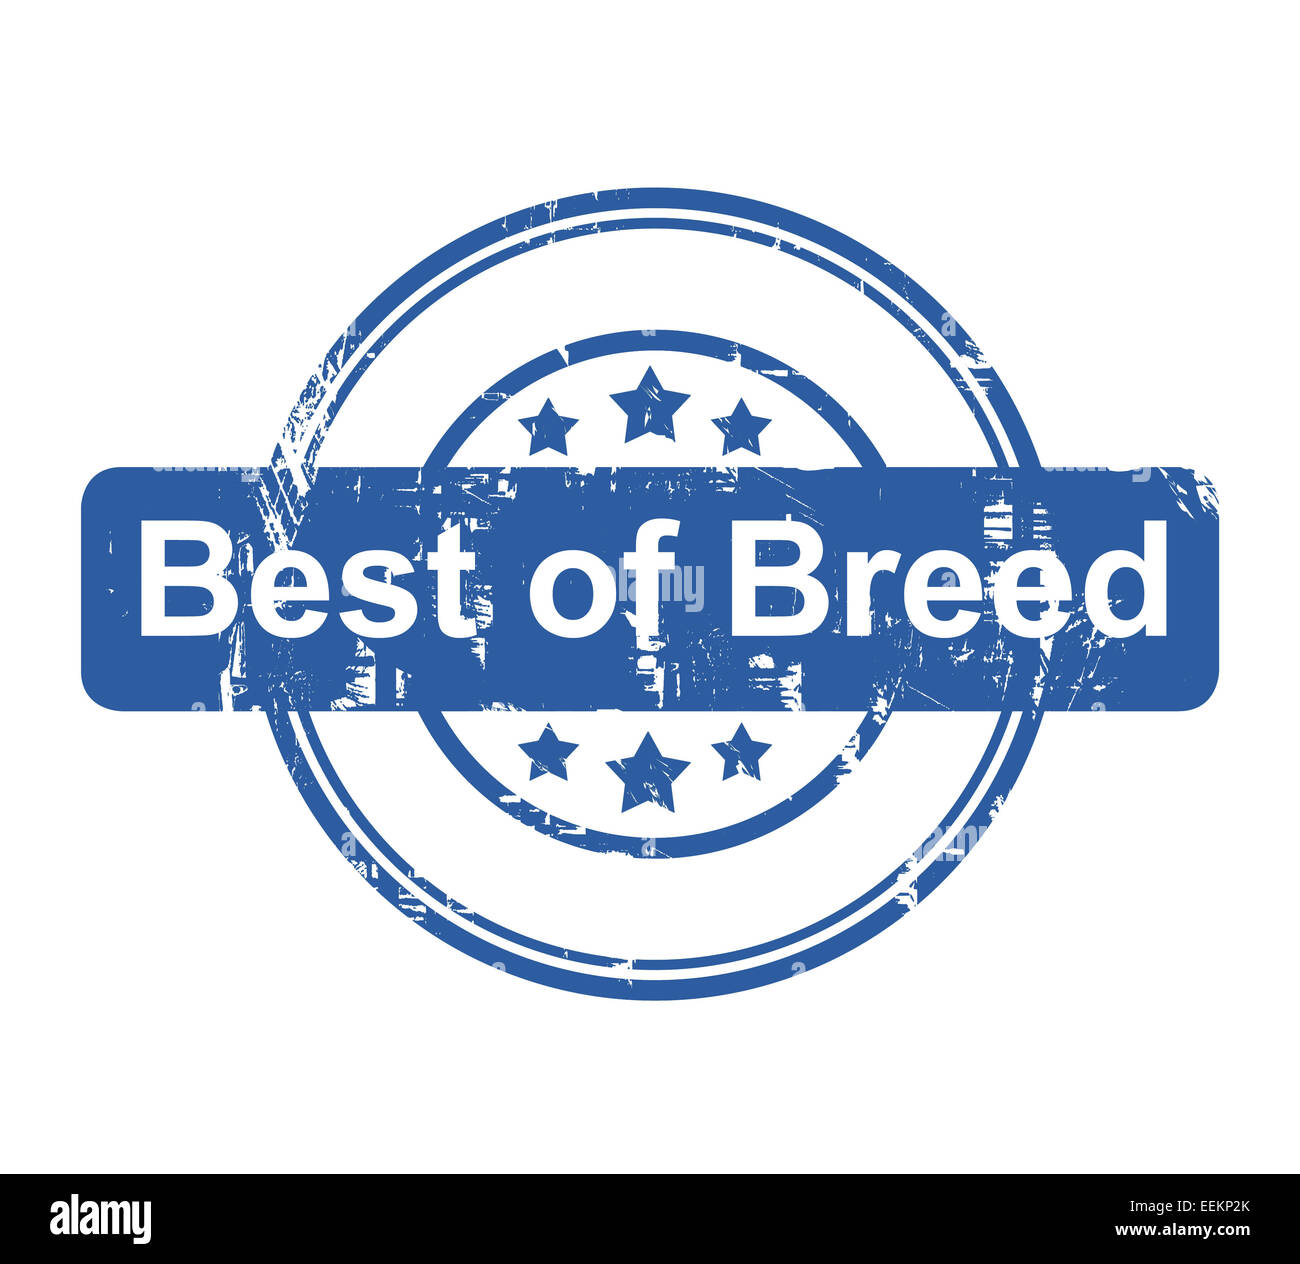 Best of breed business concept stamp with stars isolated on a white background. Stock Photo